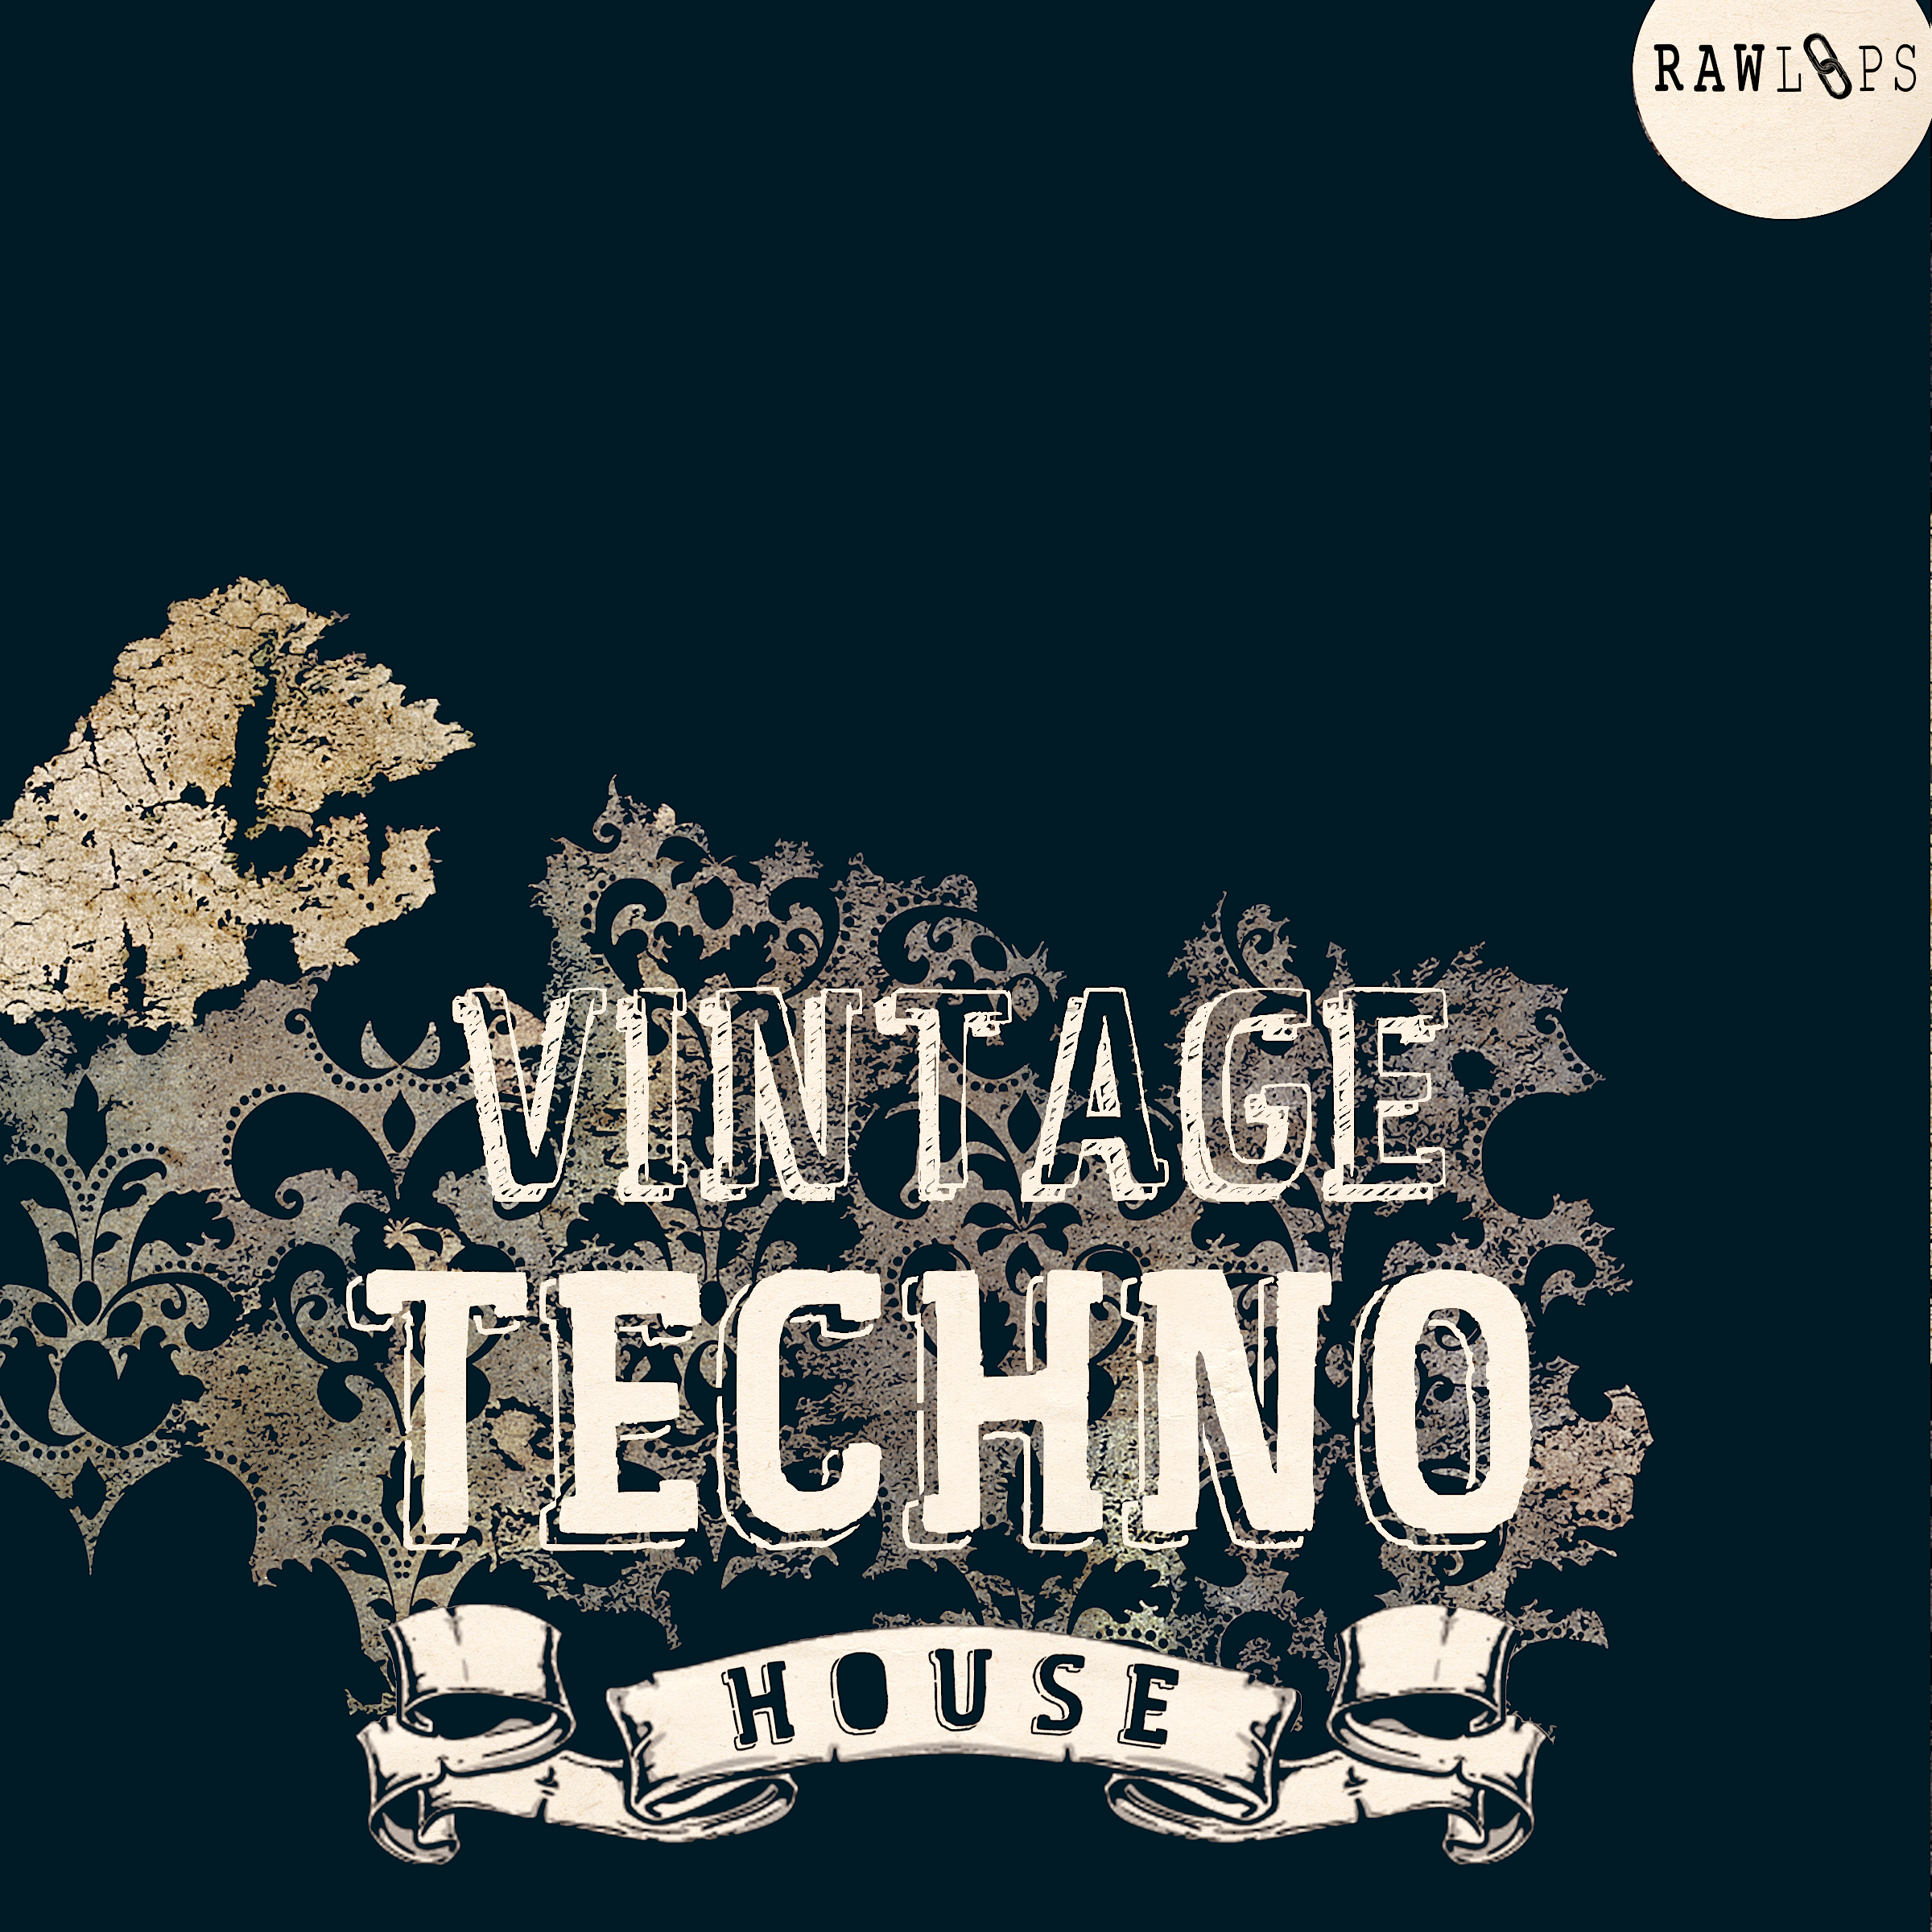 Raw Loops - Vintage Techno House